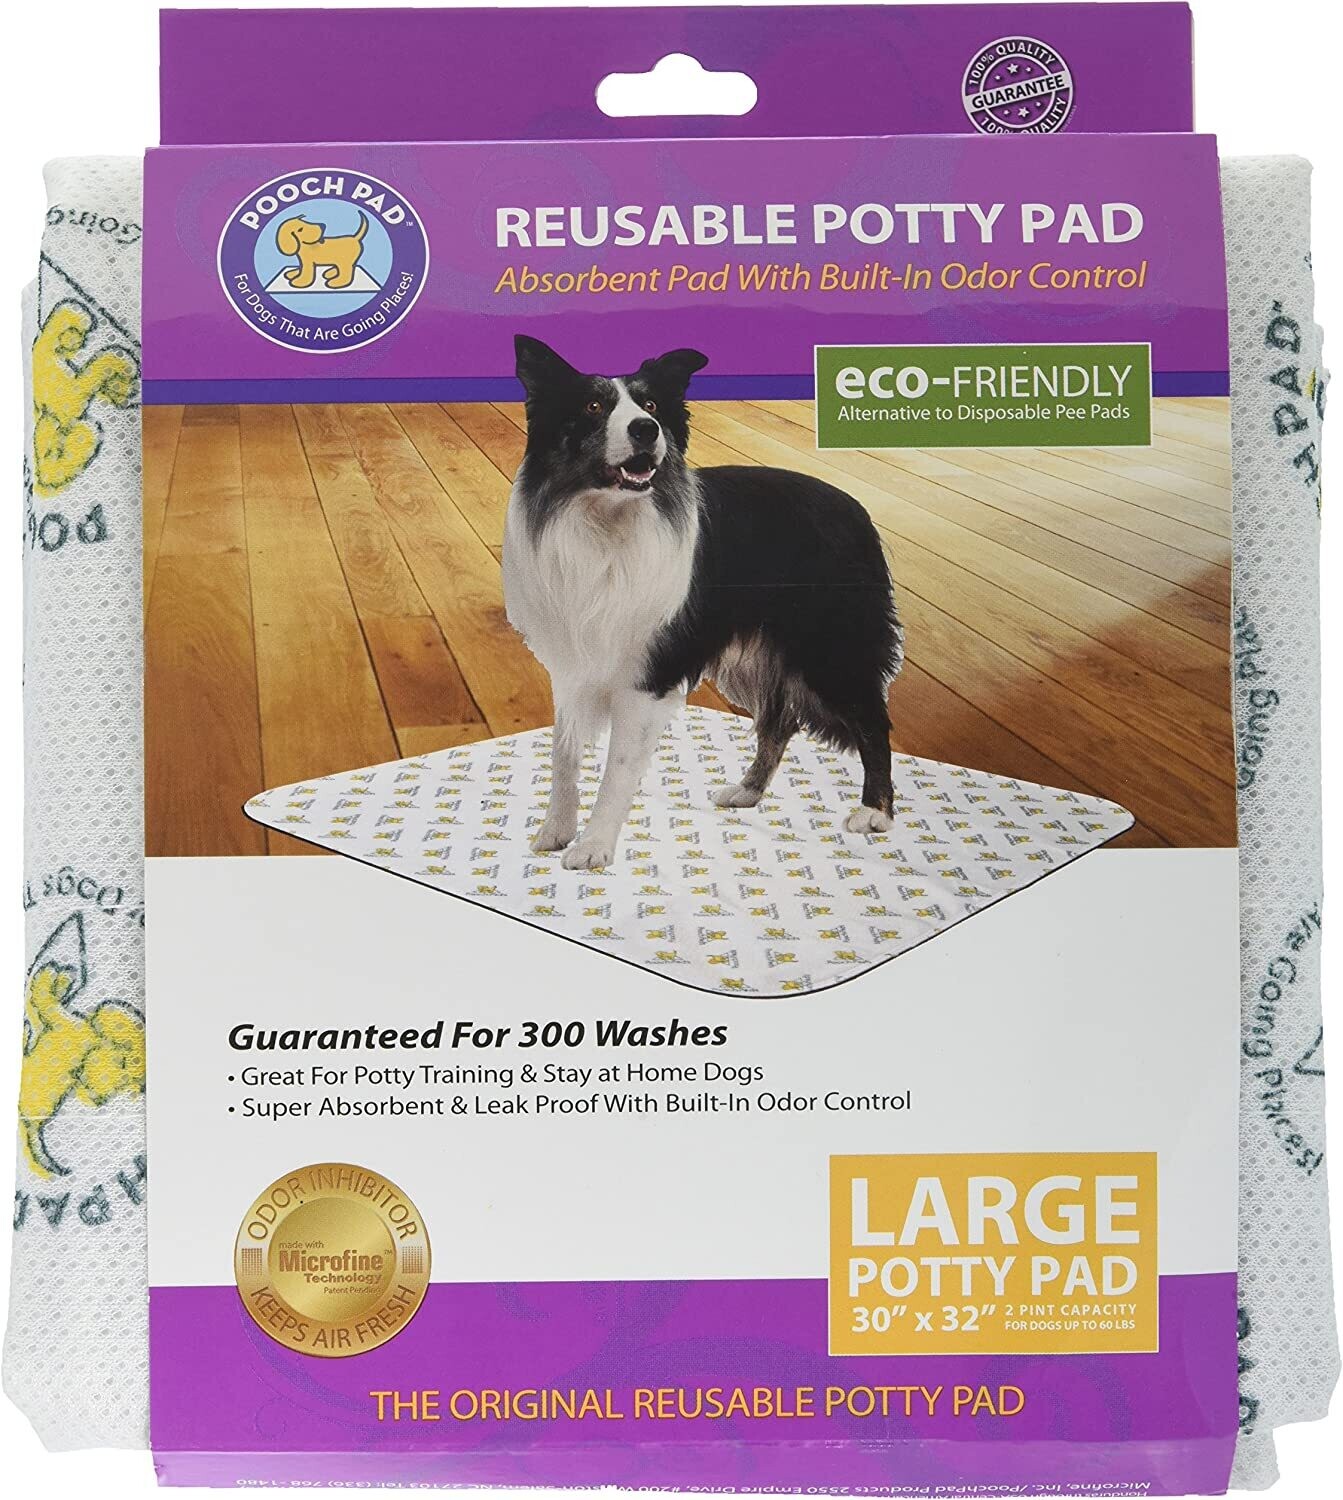 POOCH PAD REUSABLE POTTY PAD LARGE